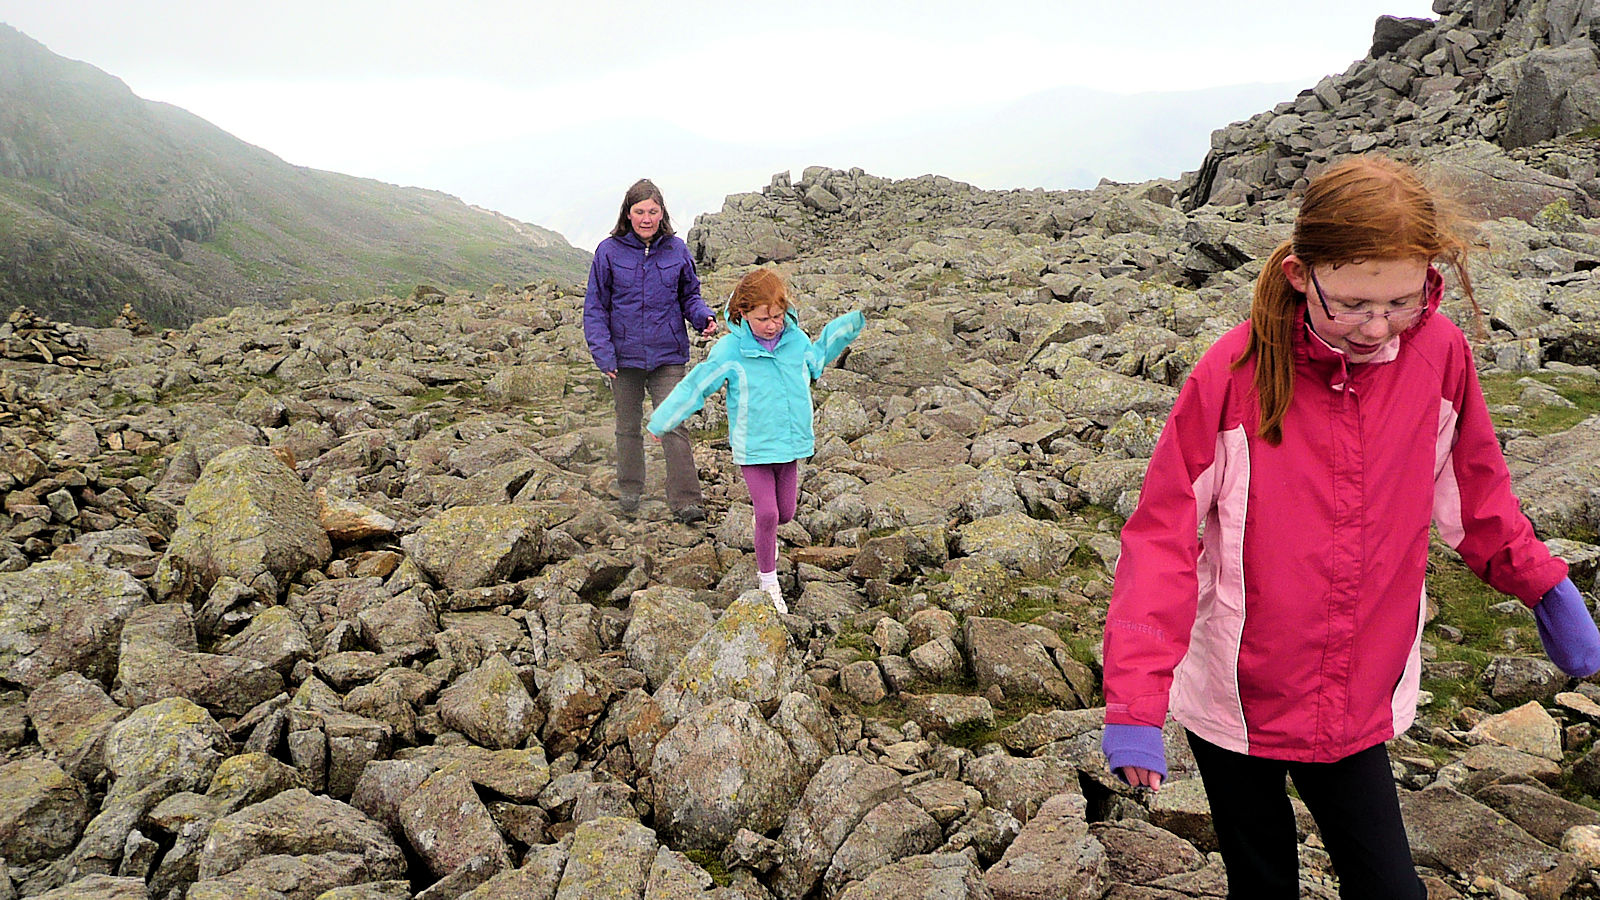 Near the summit of Scafell Pike